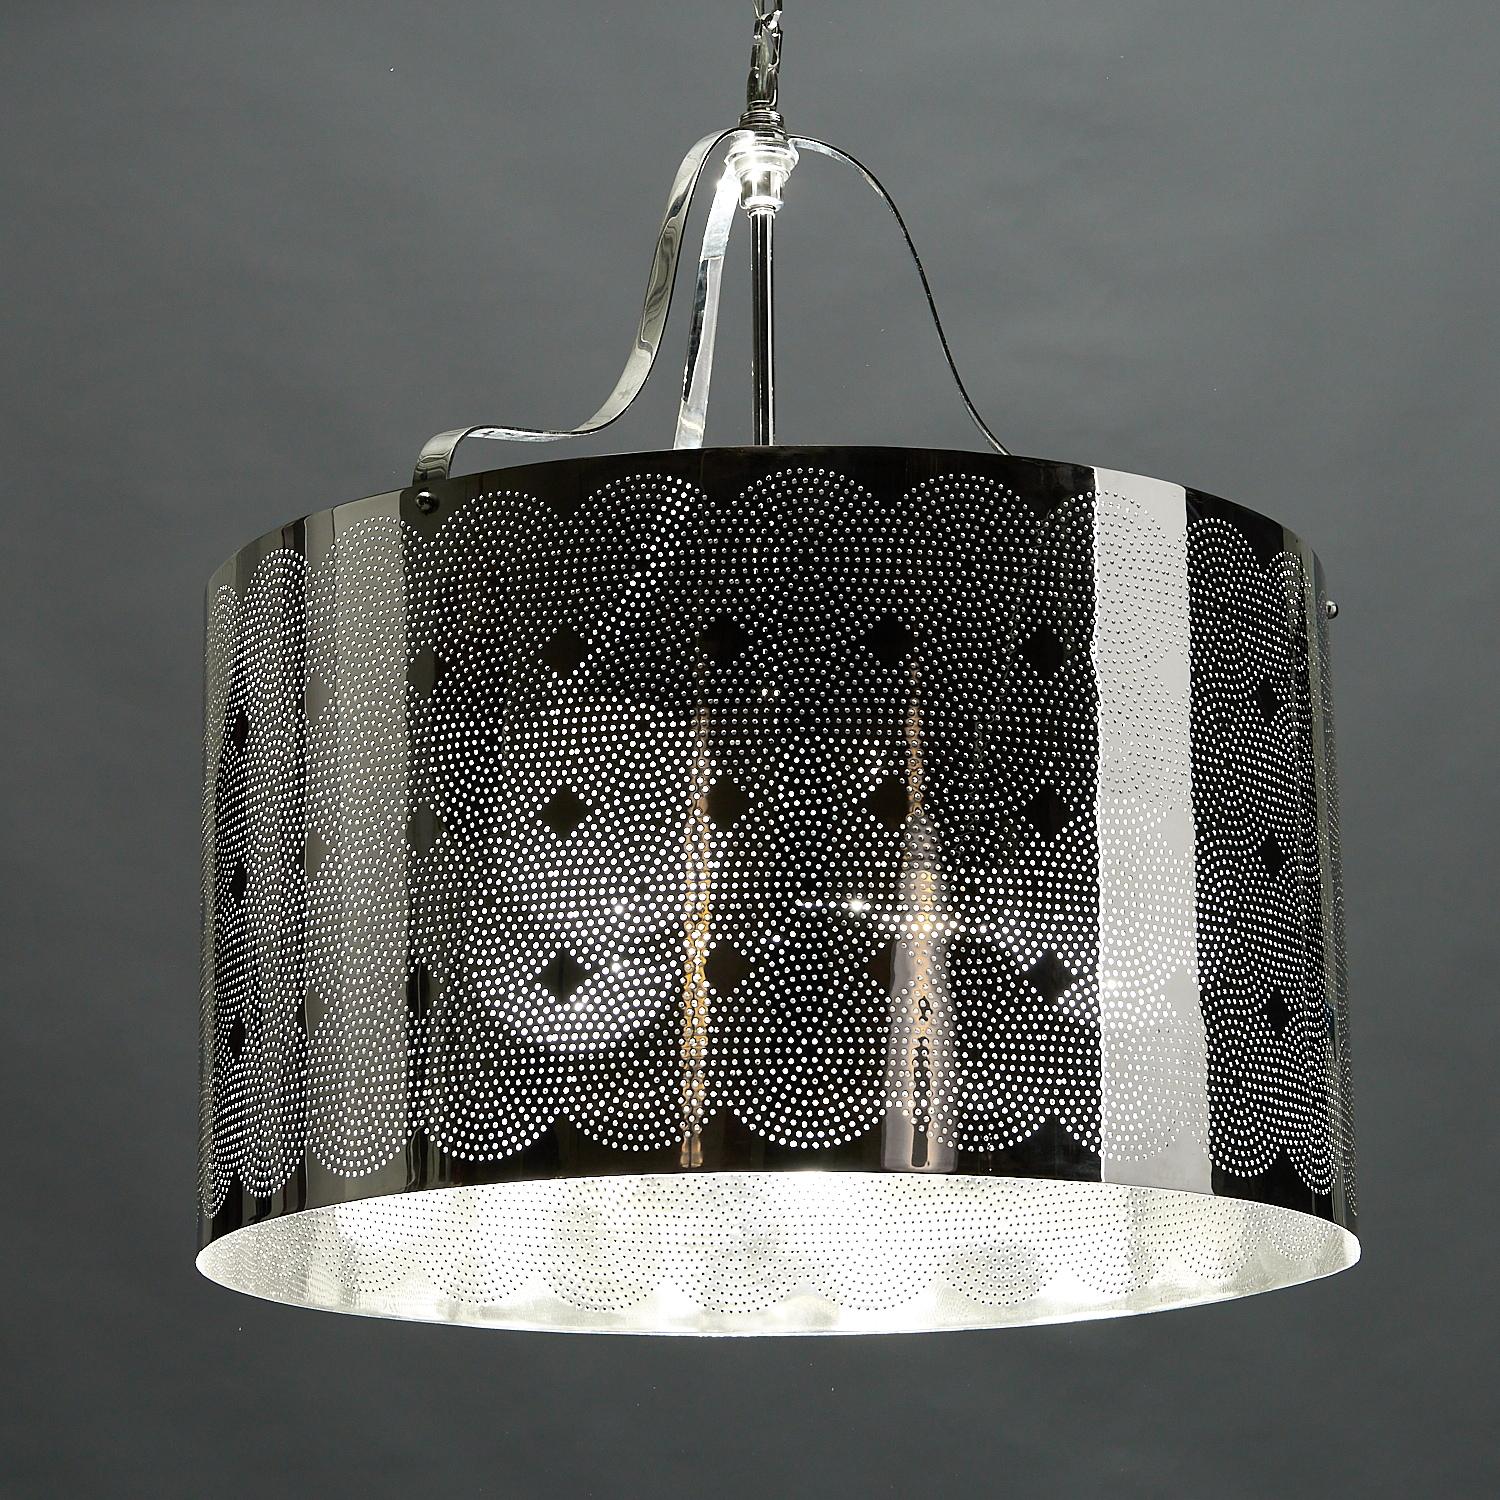 Contemporary Frazier Designs Large Chromed and Pierced Drum Shade Chandelier For Sale